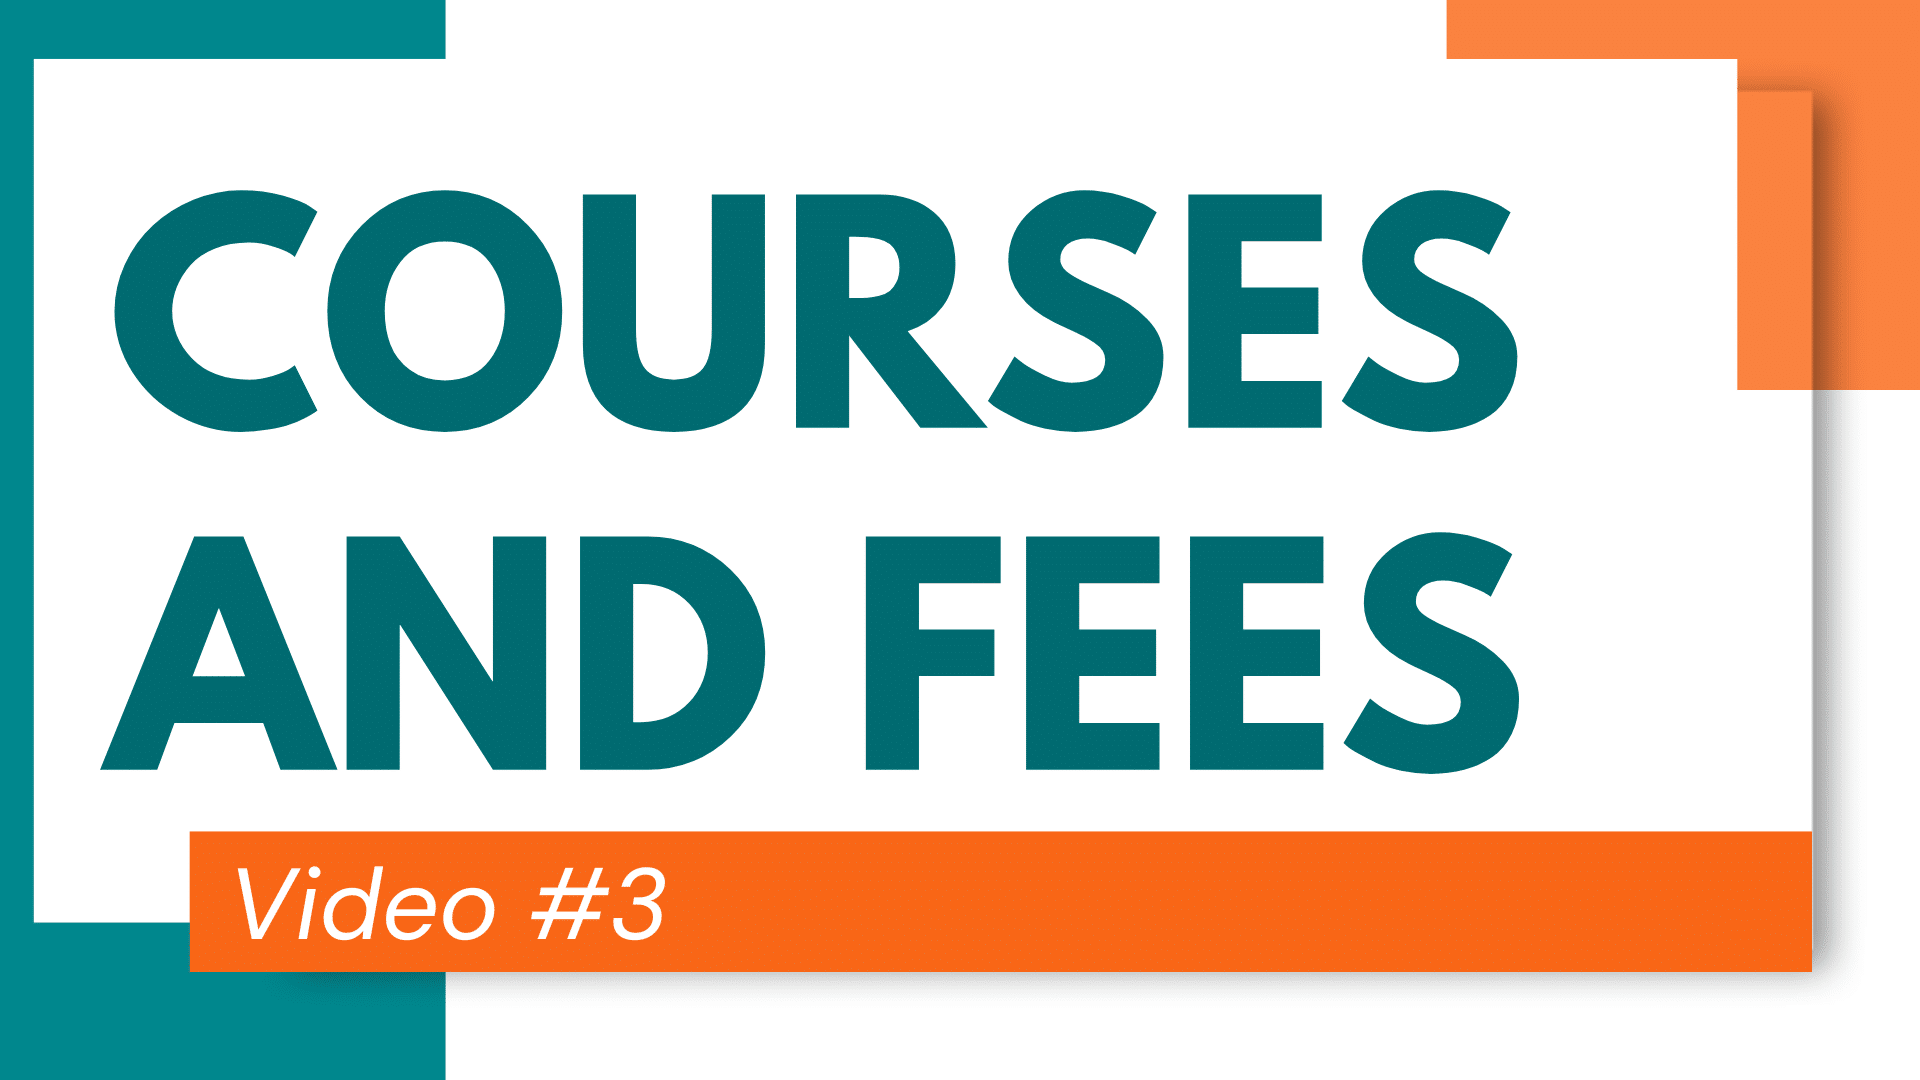 3. Courses and Fees